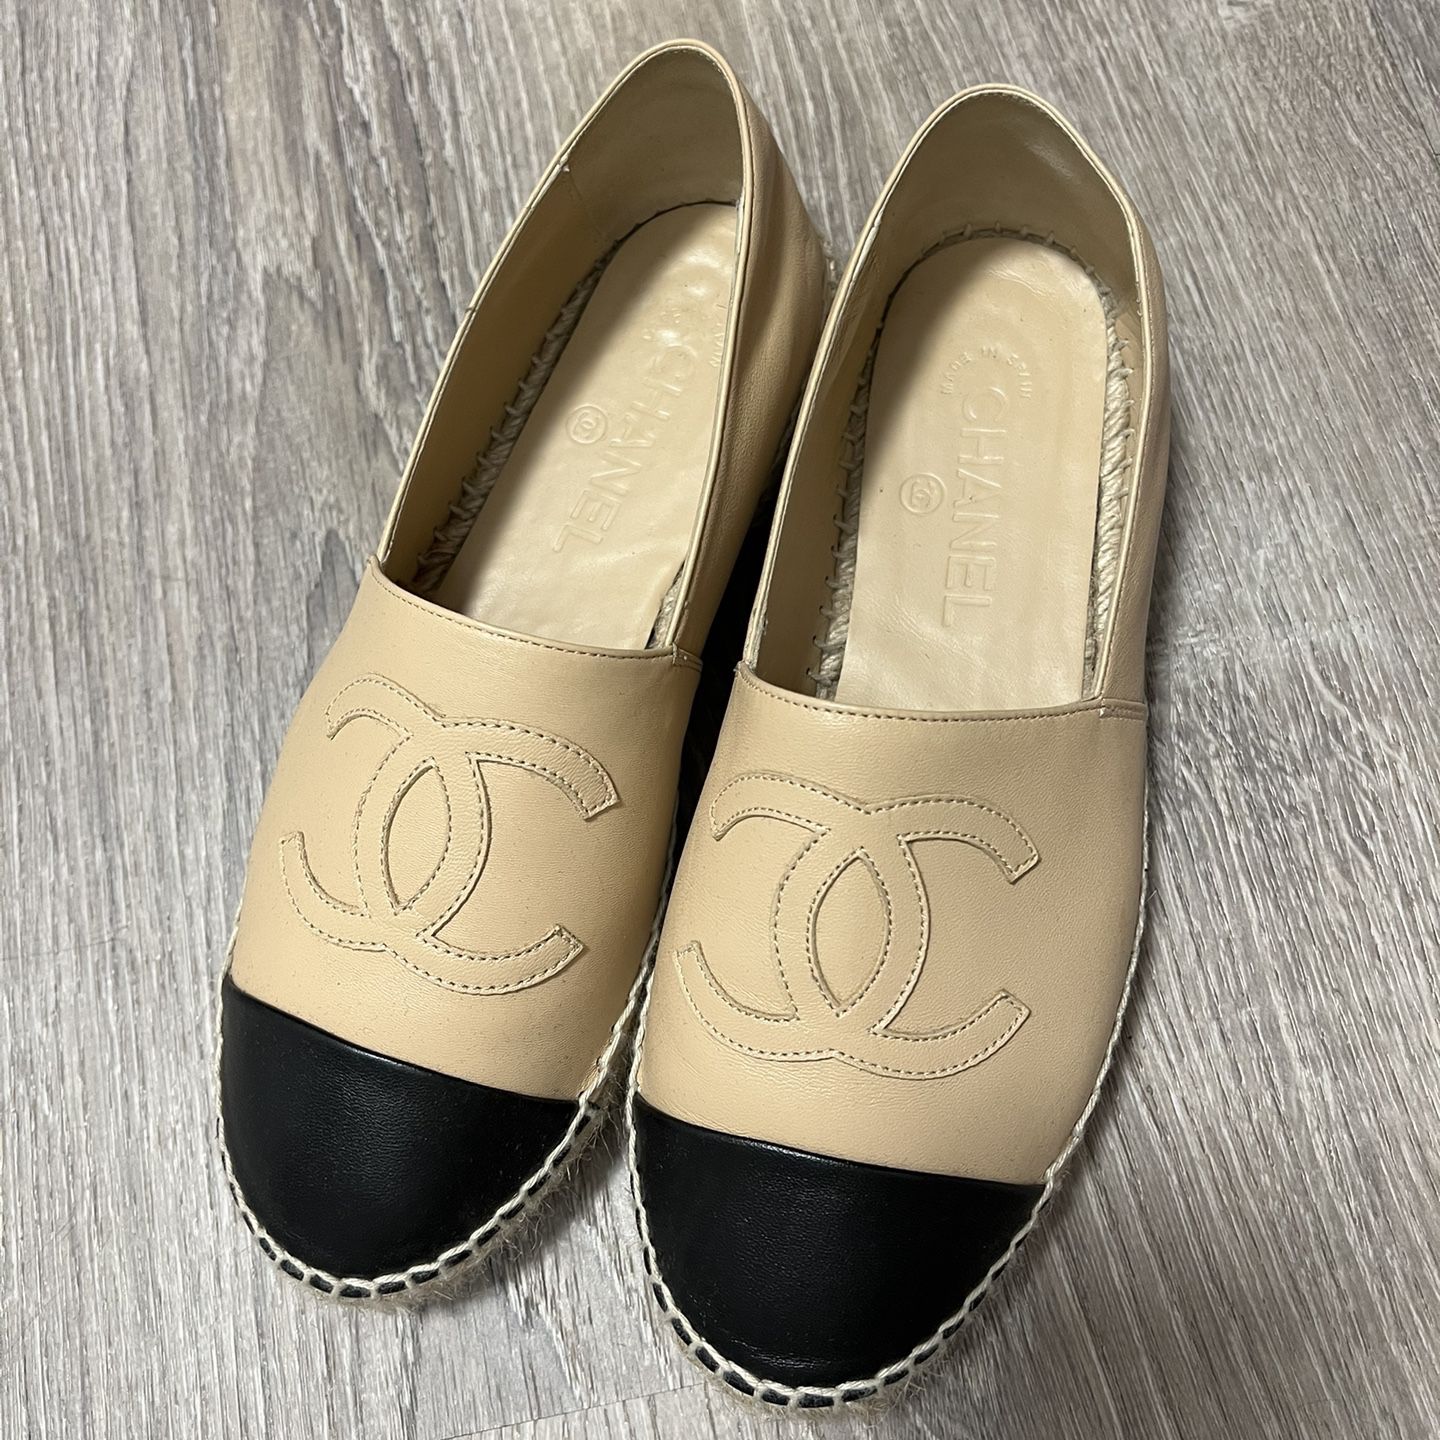 Chanel Espadrilles Black And Nude shoes for Sale in Fort Lauderdale, FL -  OfferUp